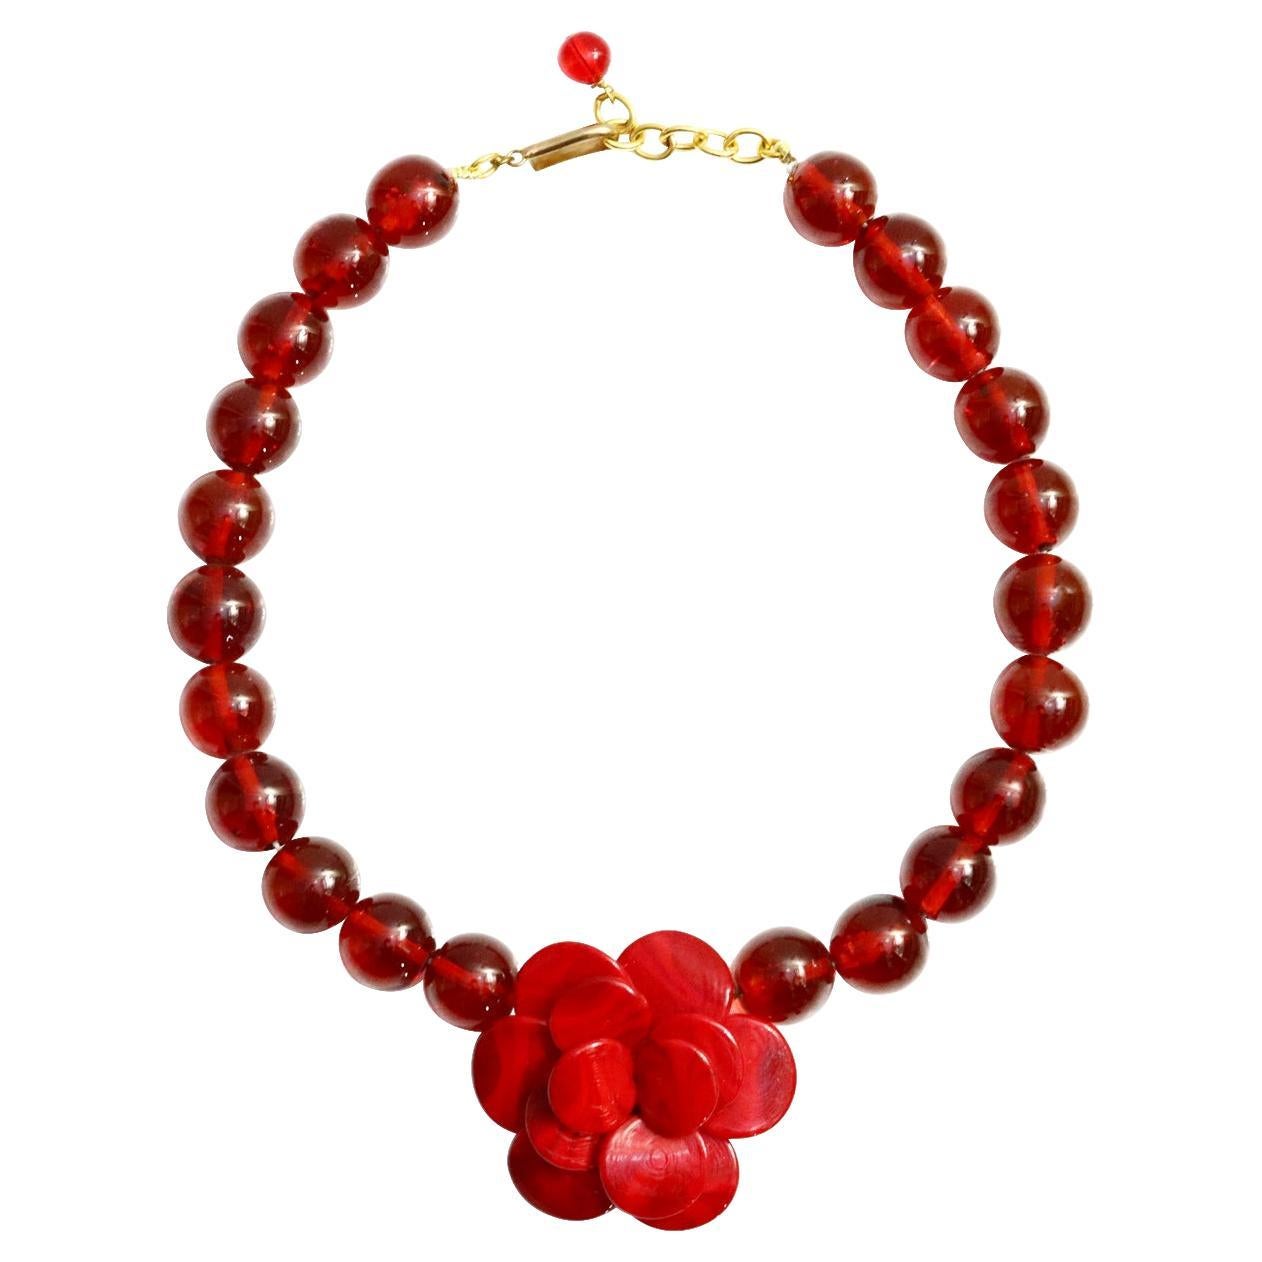 Vintage Gripoix Red Beads and MDV Paris Wooden Flower Necklace Circa 1980s